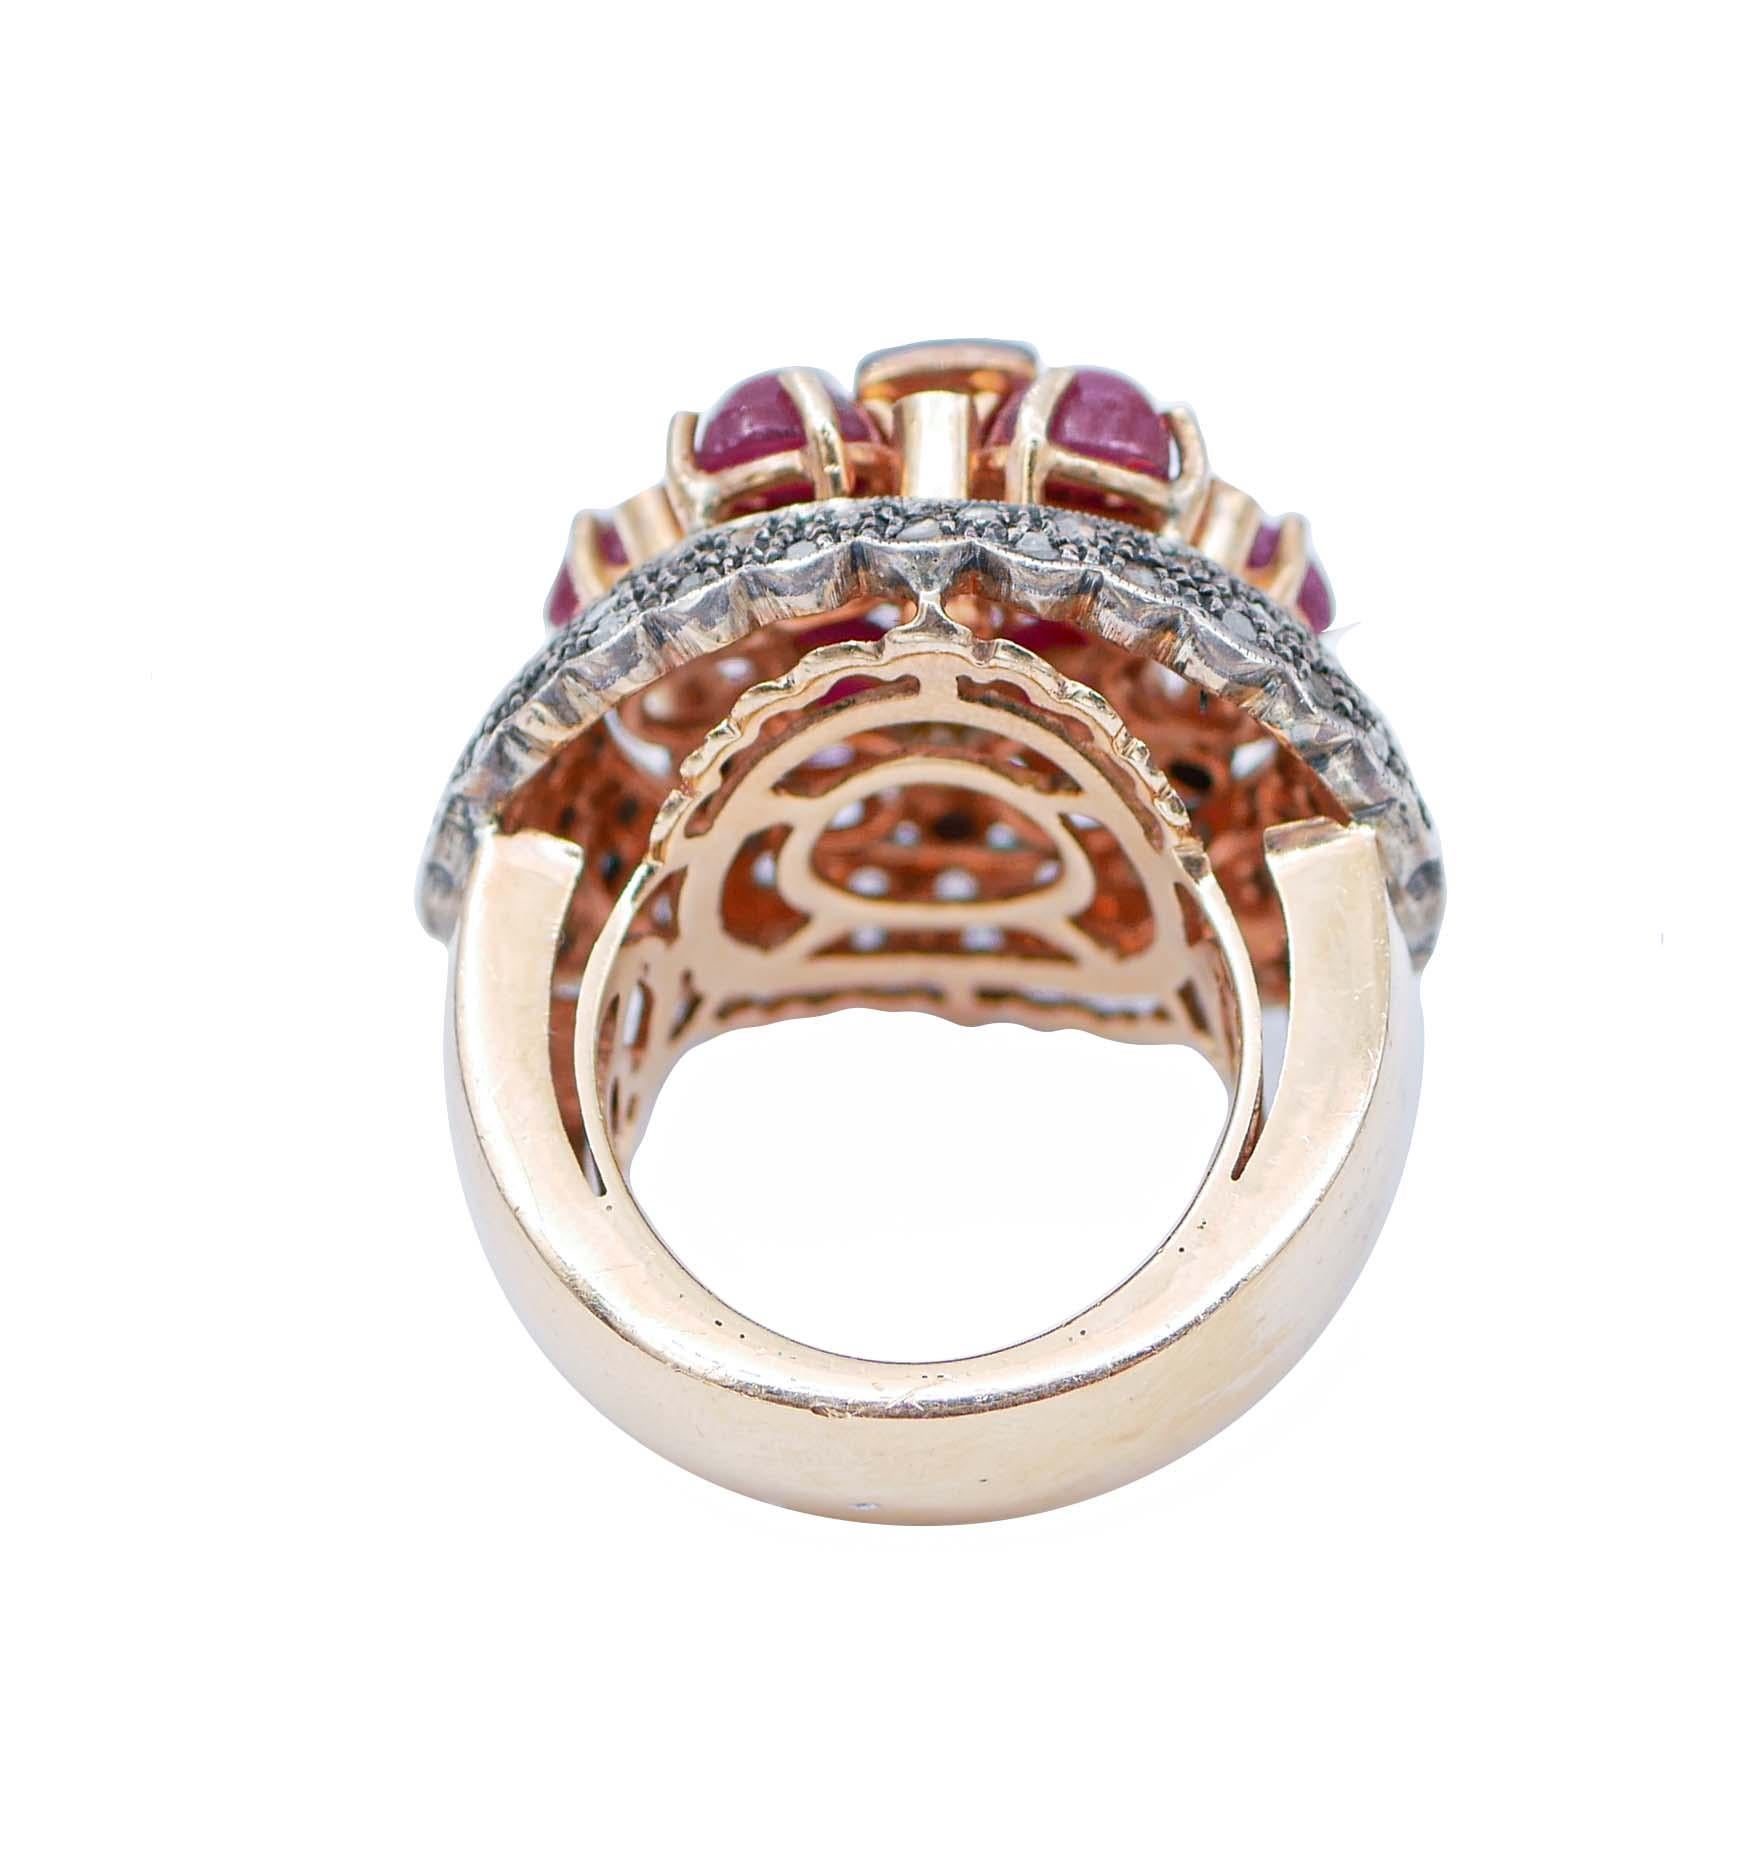 Retro Rubies, Sapphires, Diamonds, 14 Karat Rose Gold and Silver Ring. For Sale